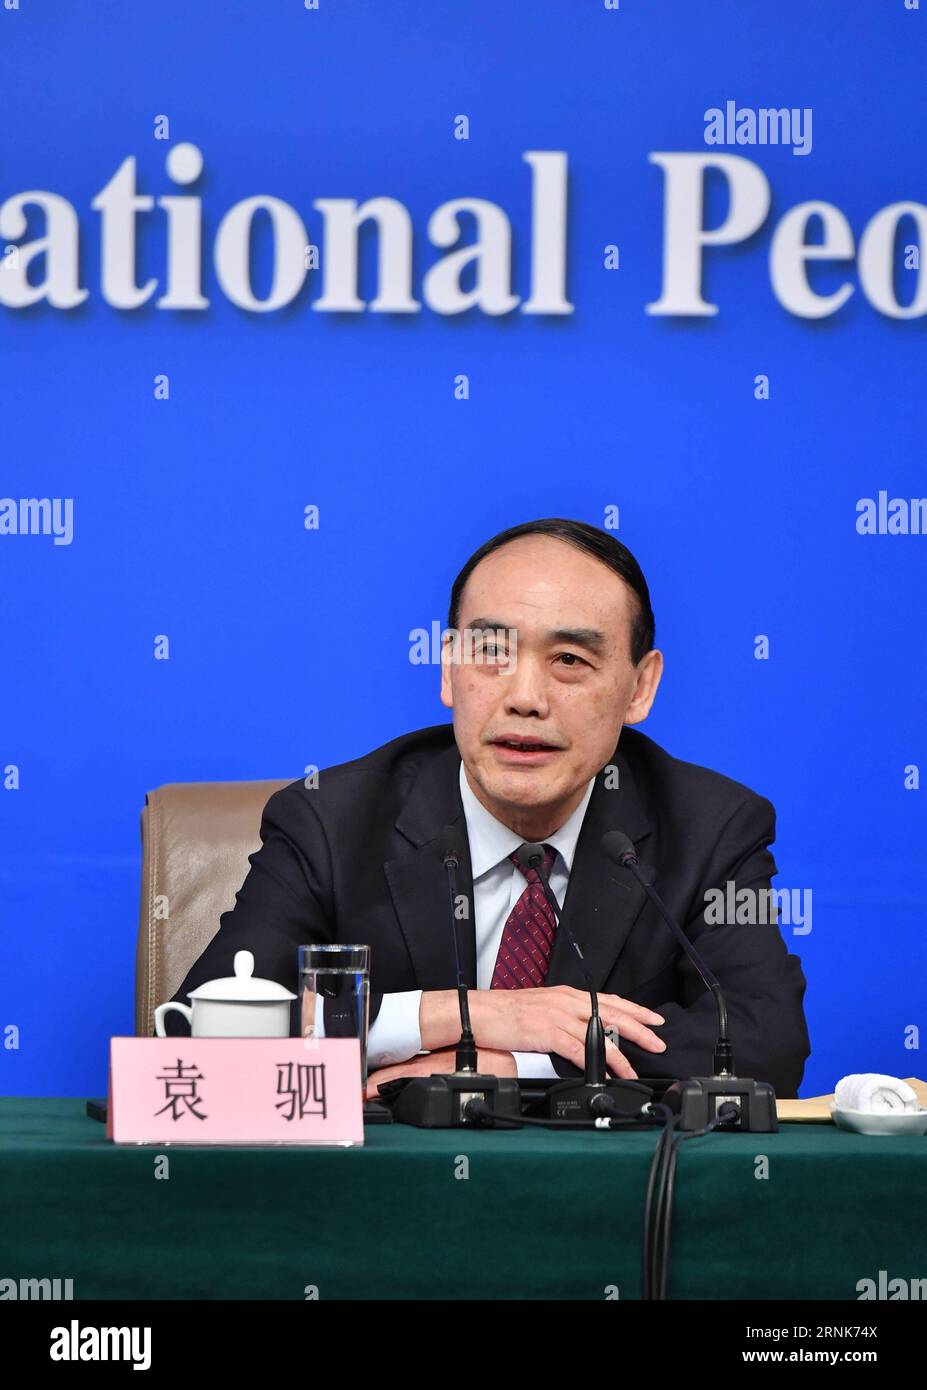 (170310) -- BEIJING, March 10, 2017 -- Yuan Si, vice-chairman of the Environment Protection and Resources Conservation Committee of the National People s Congress (NPC), answers questions on the NPC s supervisory work at a press conference for the fifth session of the 12th NPC in Beijing, capital of China, March 10, 2017. ) (zhs) (TWO SESSIONS)CHINA-BEIJING-NPC-PRESS CONFERENCE-SUPERVISORY WORK (CN) LixXin PUBLICATIONxNOTxINxCHN   Beijing March 10 2017 Yuan Si Vice Chairman of The Environment Protection and Resources Conservation Committee of The National Celebrities S Congress NPC Answers Que Stock Photo